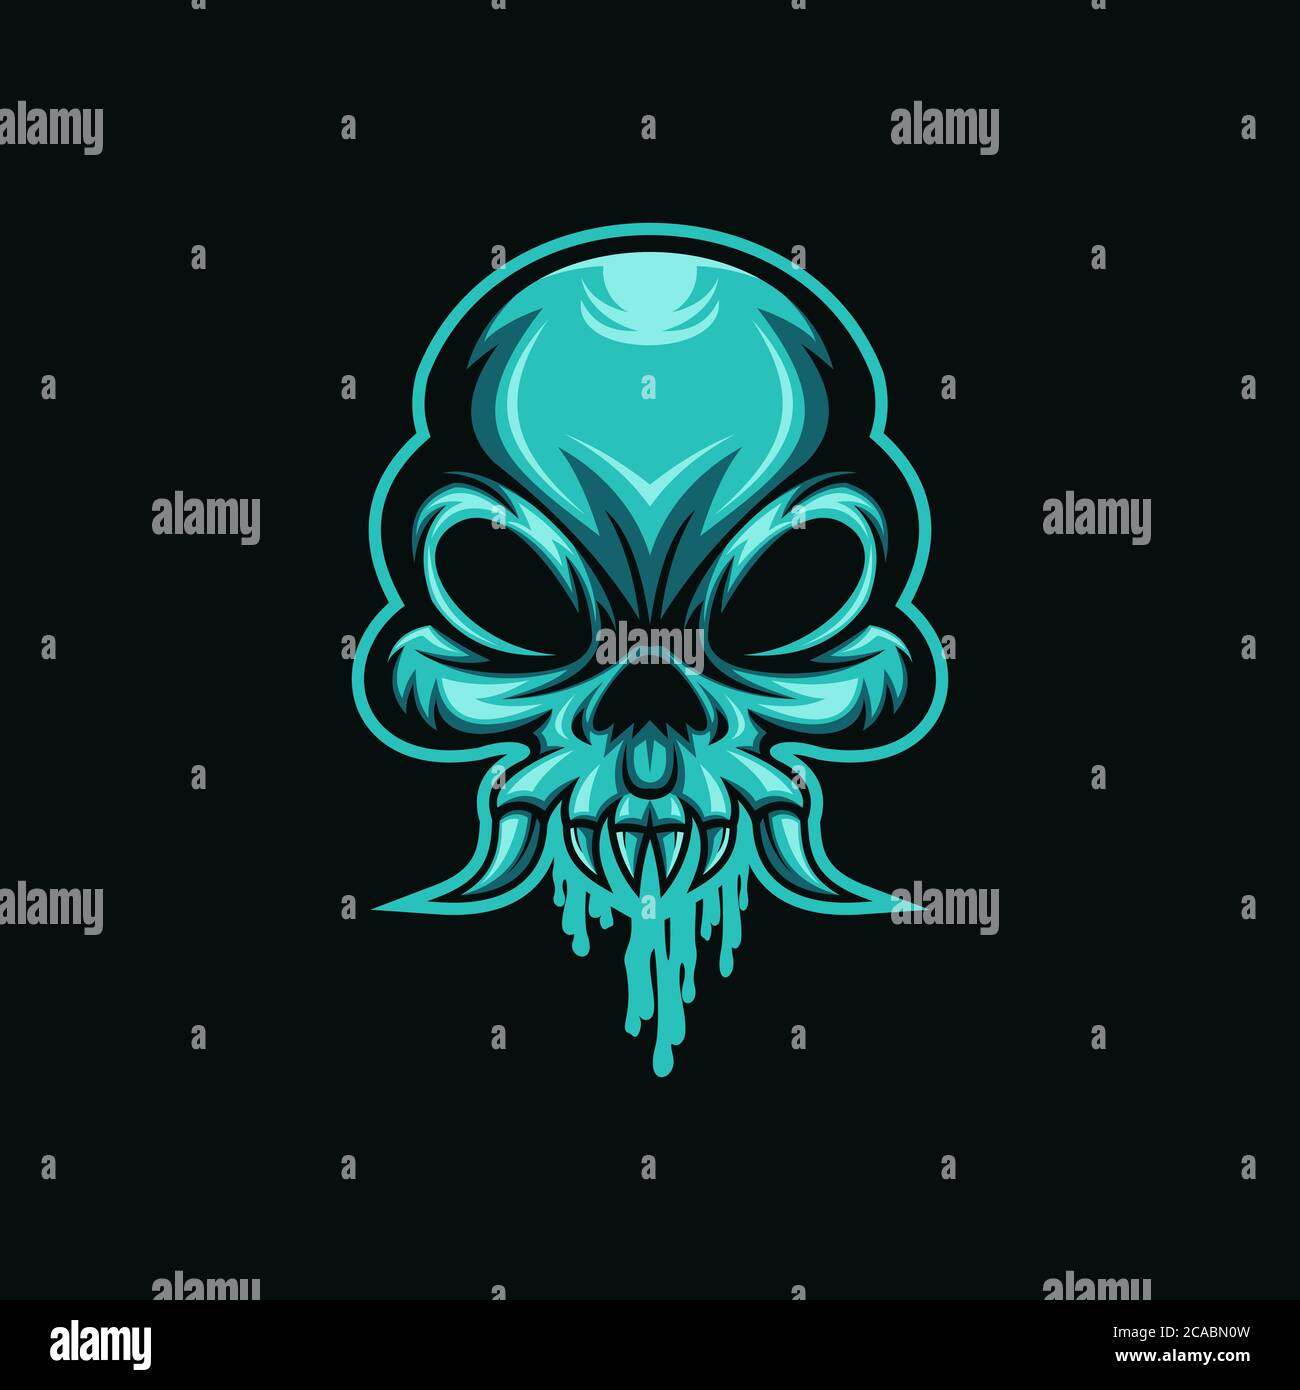 skull head mucus vector illustration amazing design for your company or brand Stock Vector